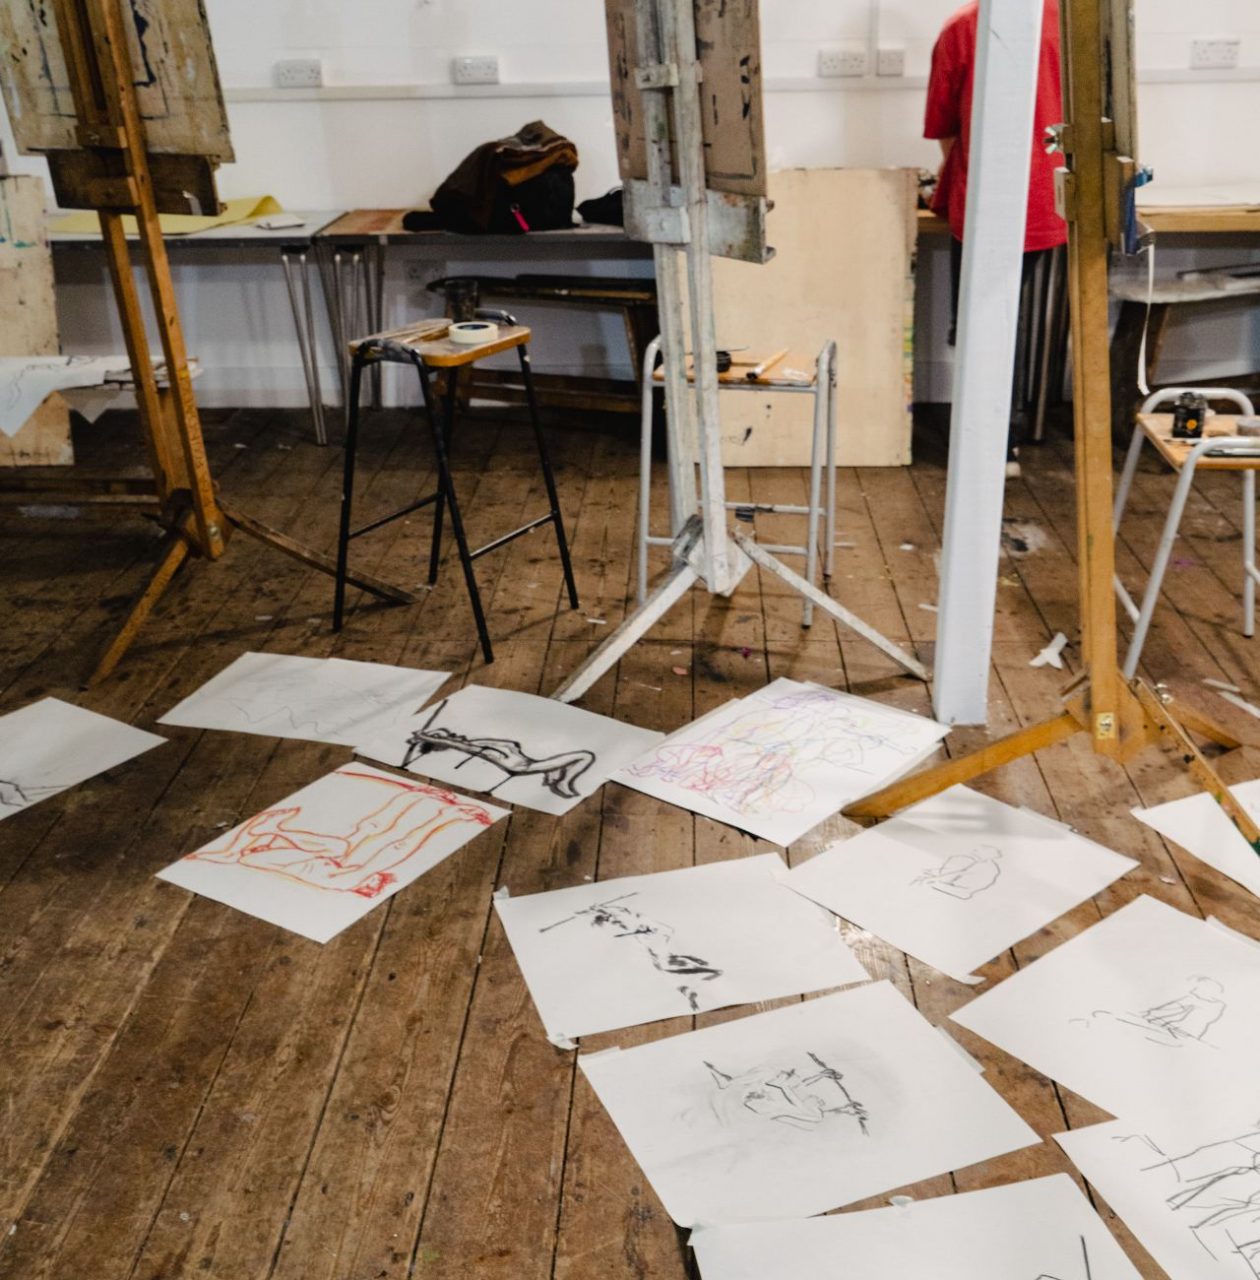 Students participate in a life drawing workshop led by Paul Ruskin, at the Falmouth Illustration Festival 7th February 2022.